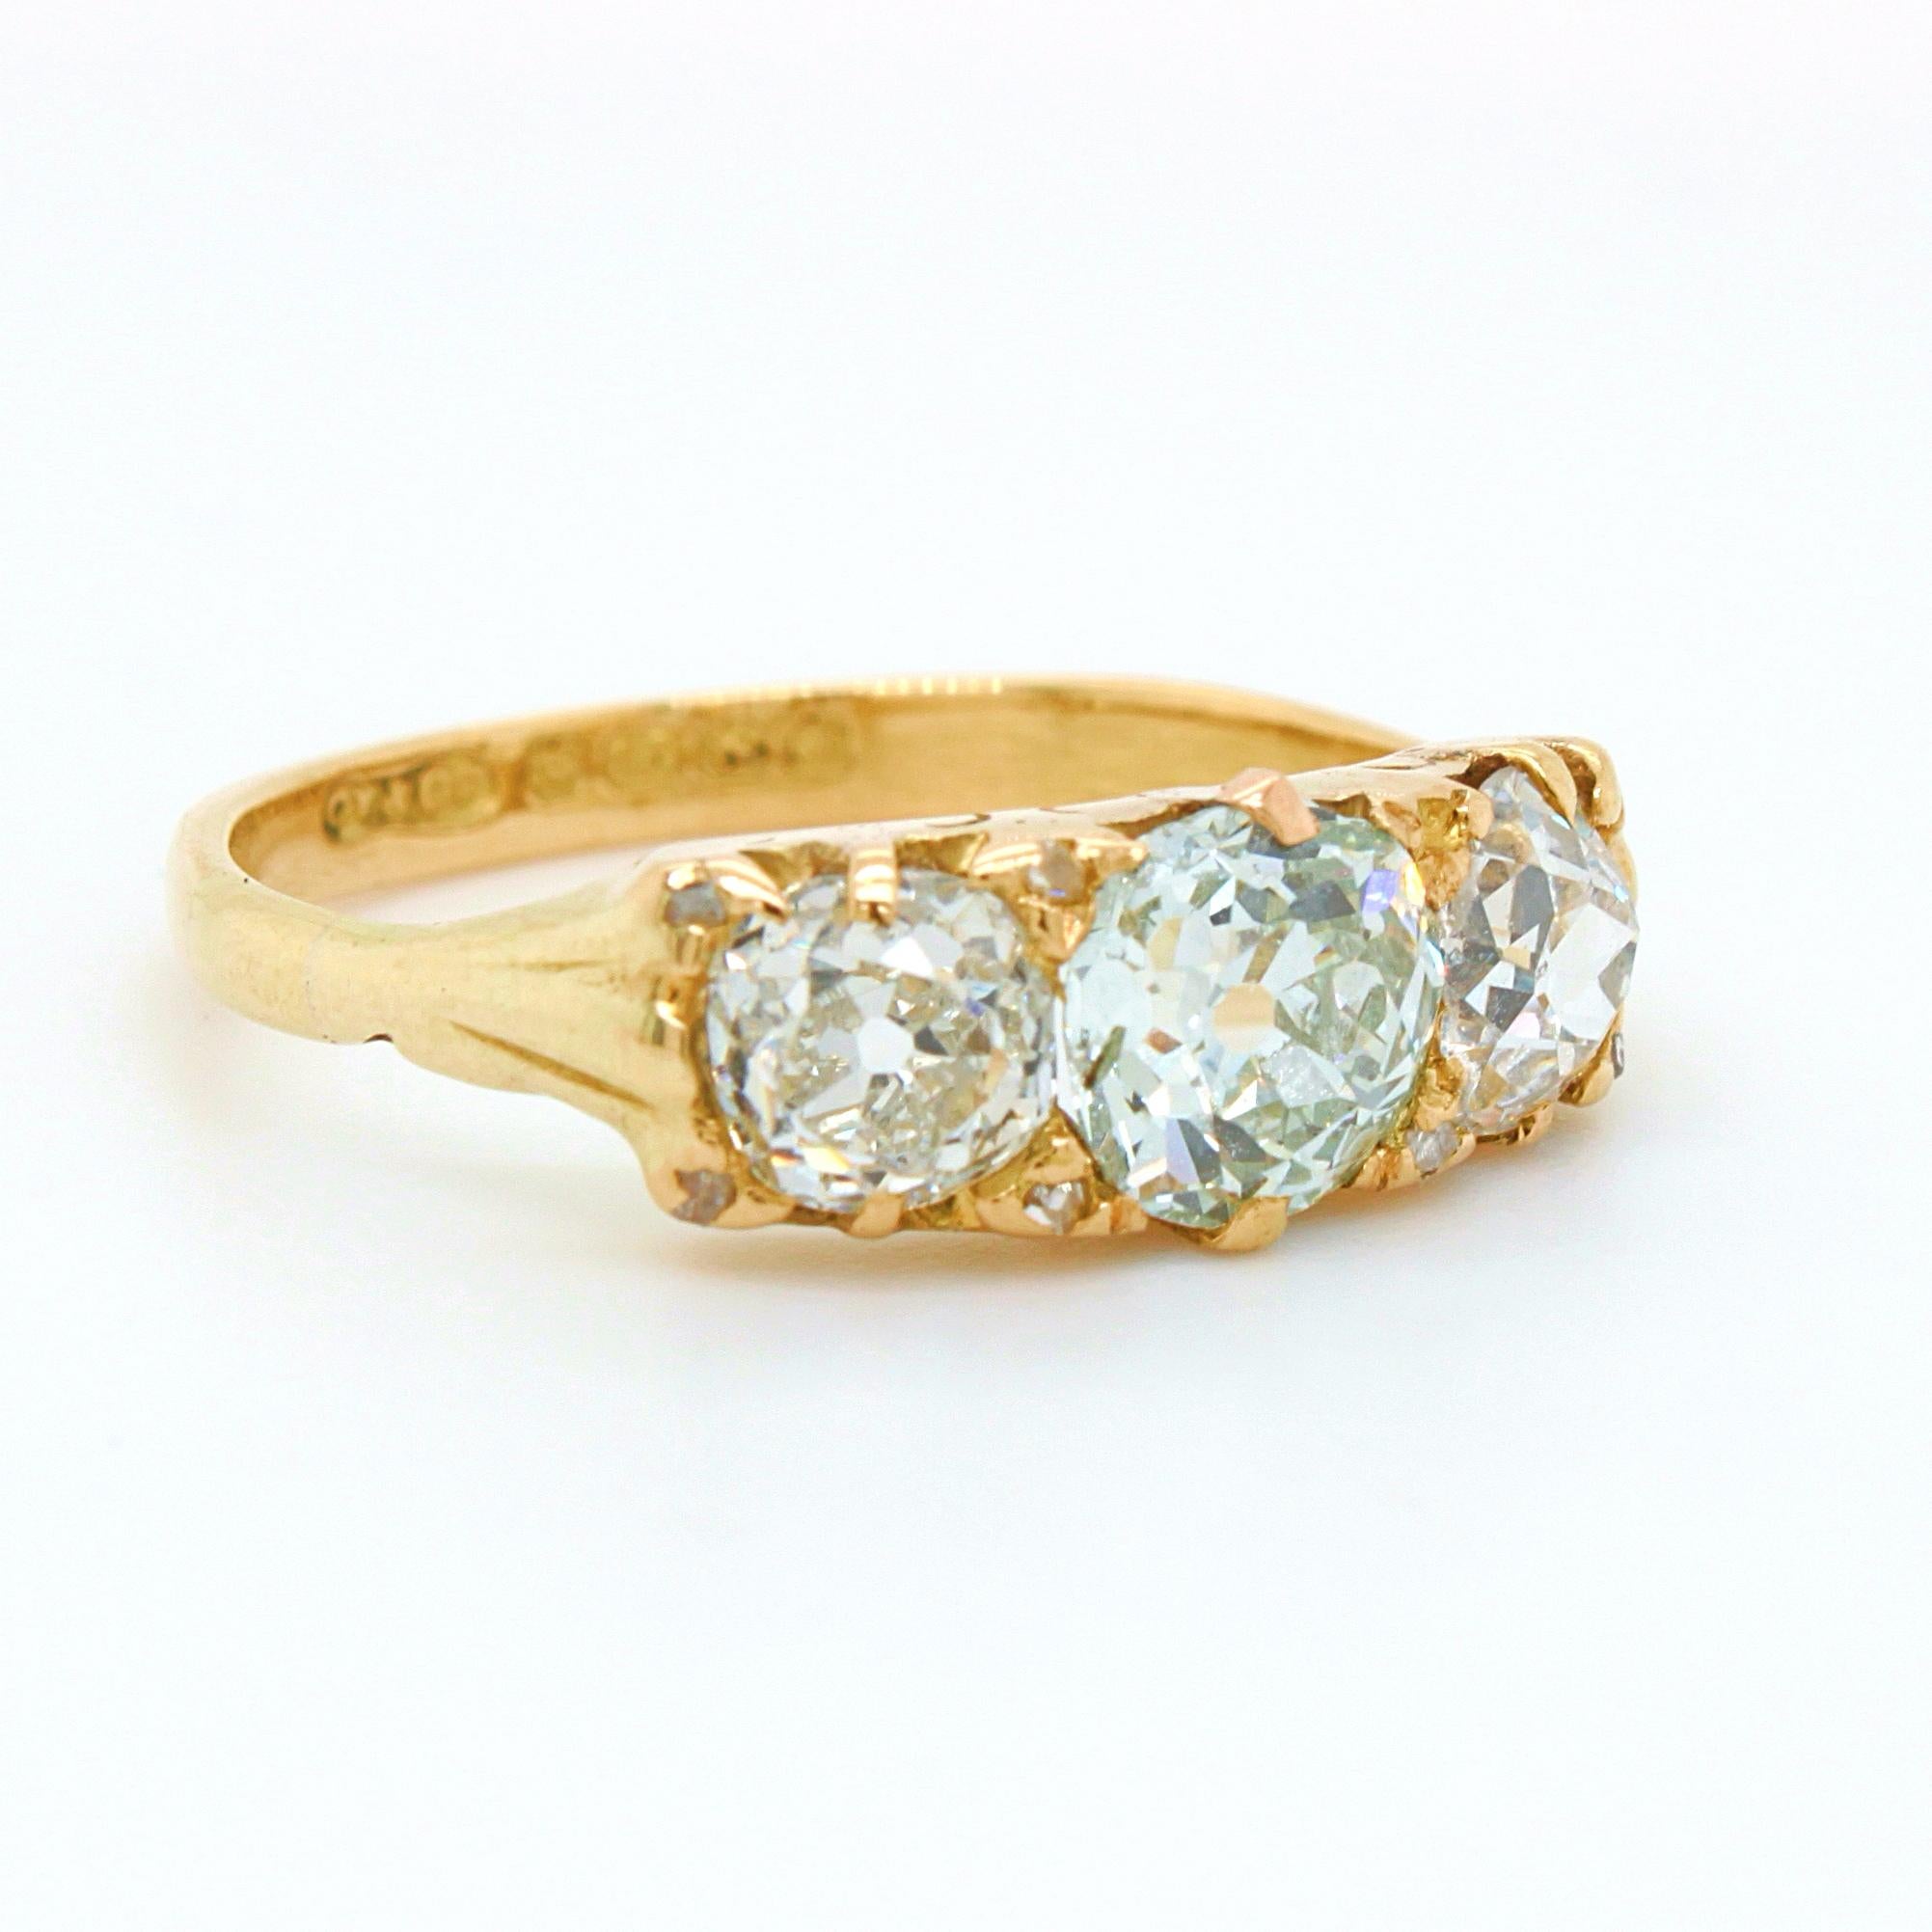 A Victorian three diamond ring in 18k yellow gold, ca. 1880s. The bigger centre stone out of the three is a very light green old European cut diamond weighing 0.88ct, accompanied by a GIA certificate, with no eye visible inclusions. The two side